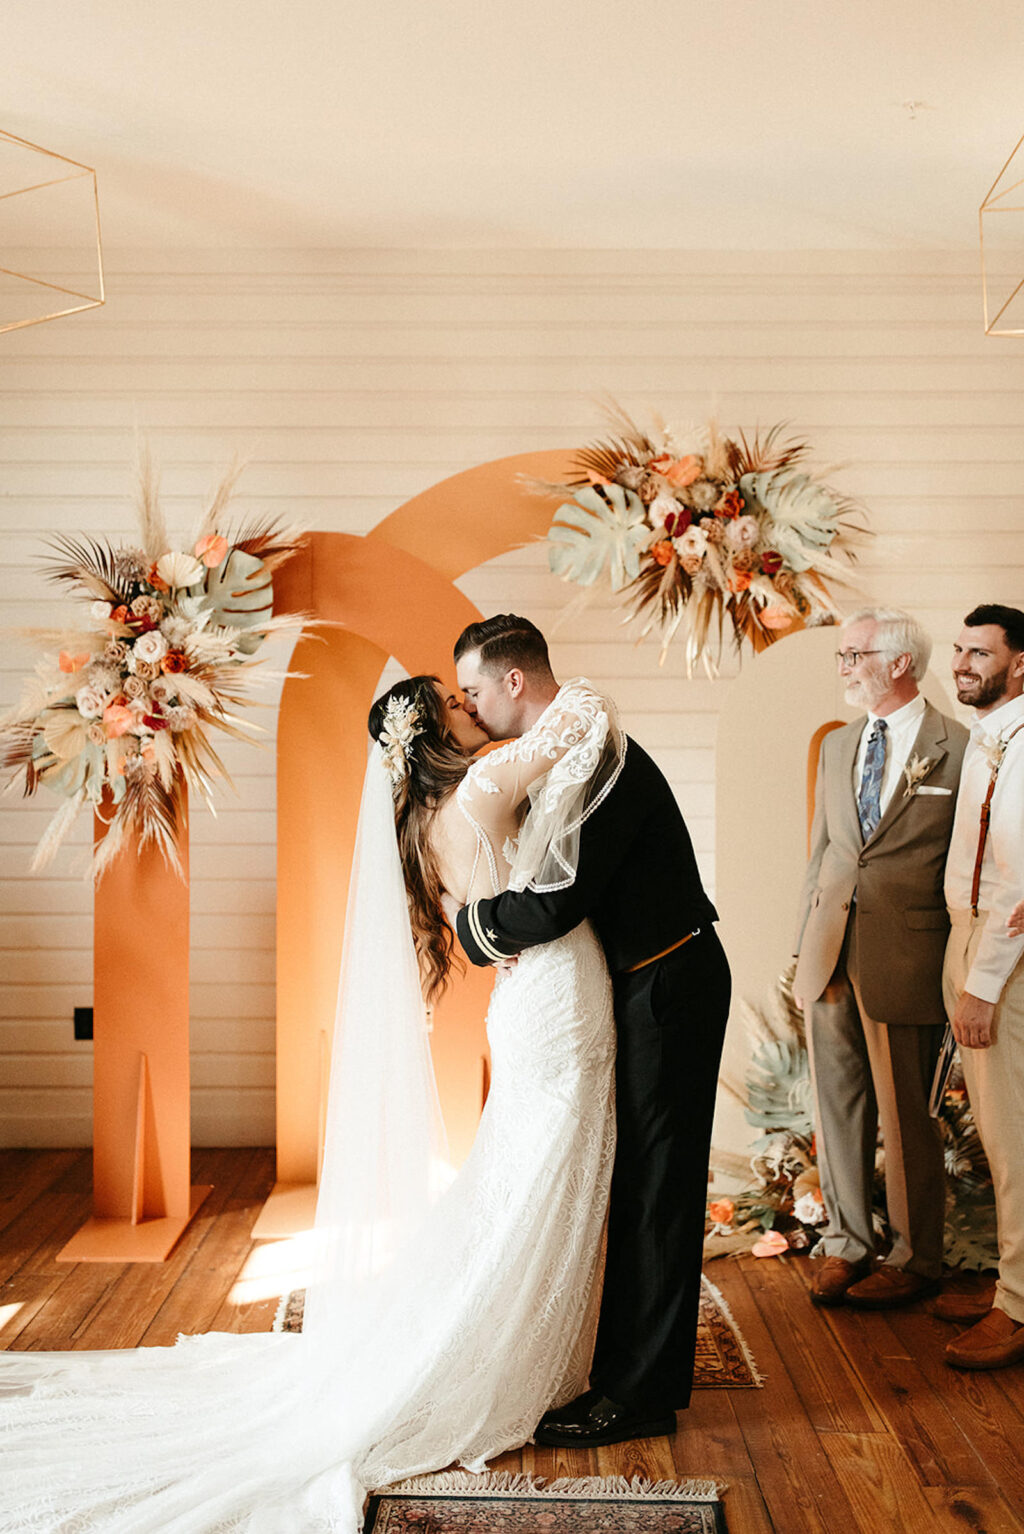 Earthy Neutral Boho Modern Chic Wedding, Emotional Bride and Groom Exchanging First Kiss, Arched Terracotta and Cream Panel Backdrops with Lush Floral Bouquets | Tampa Bay Wedding Planner Wilder Mind Events | Wedding Florist Save the Date Florida